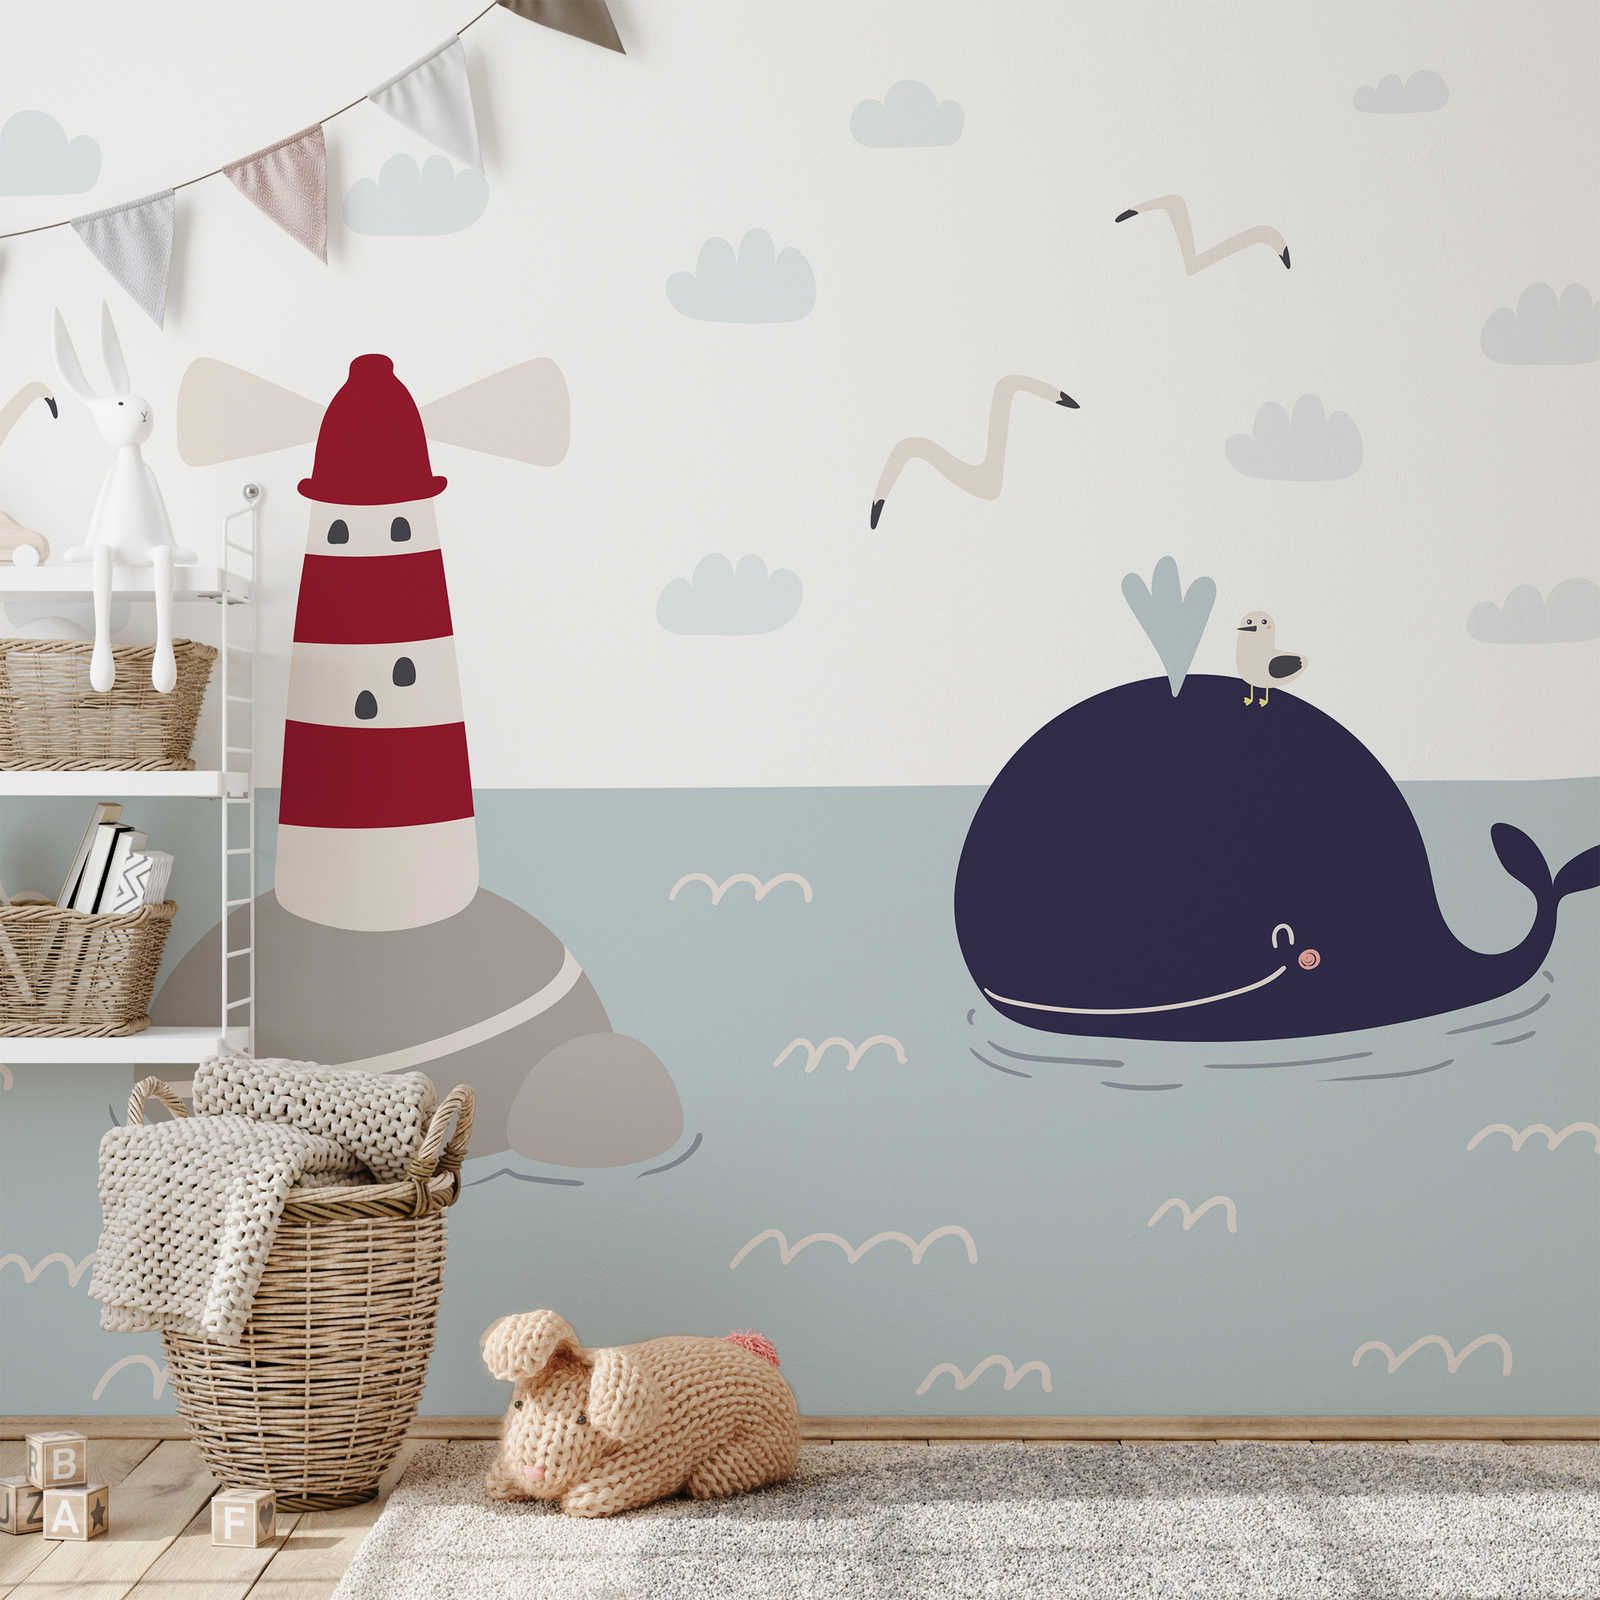         Photo wallpaper for children's room with lighthouse and whale - Smooth & slightly shiny non-woven
    